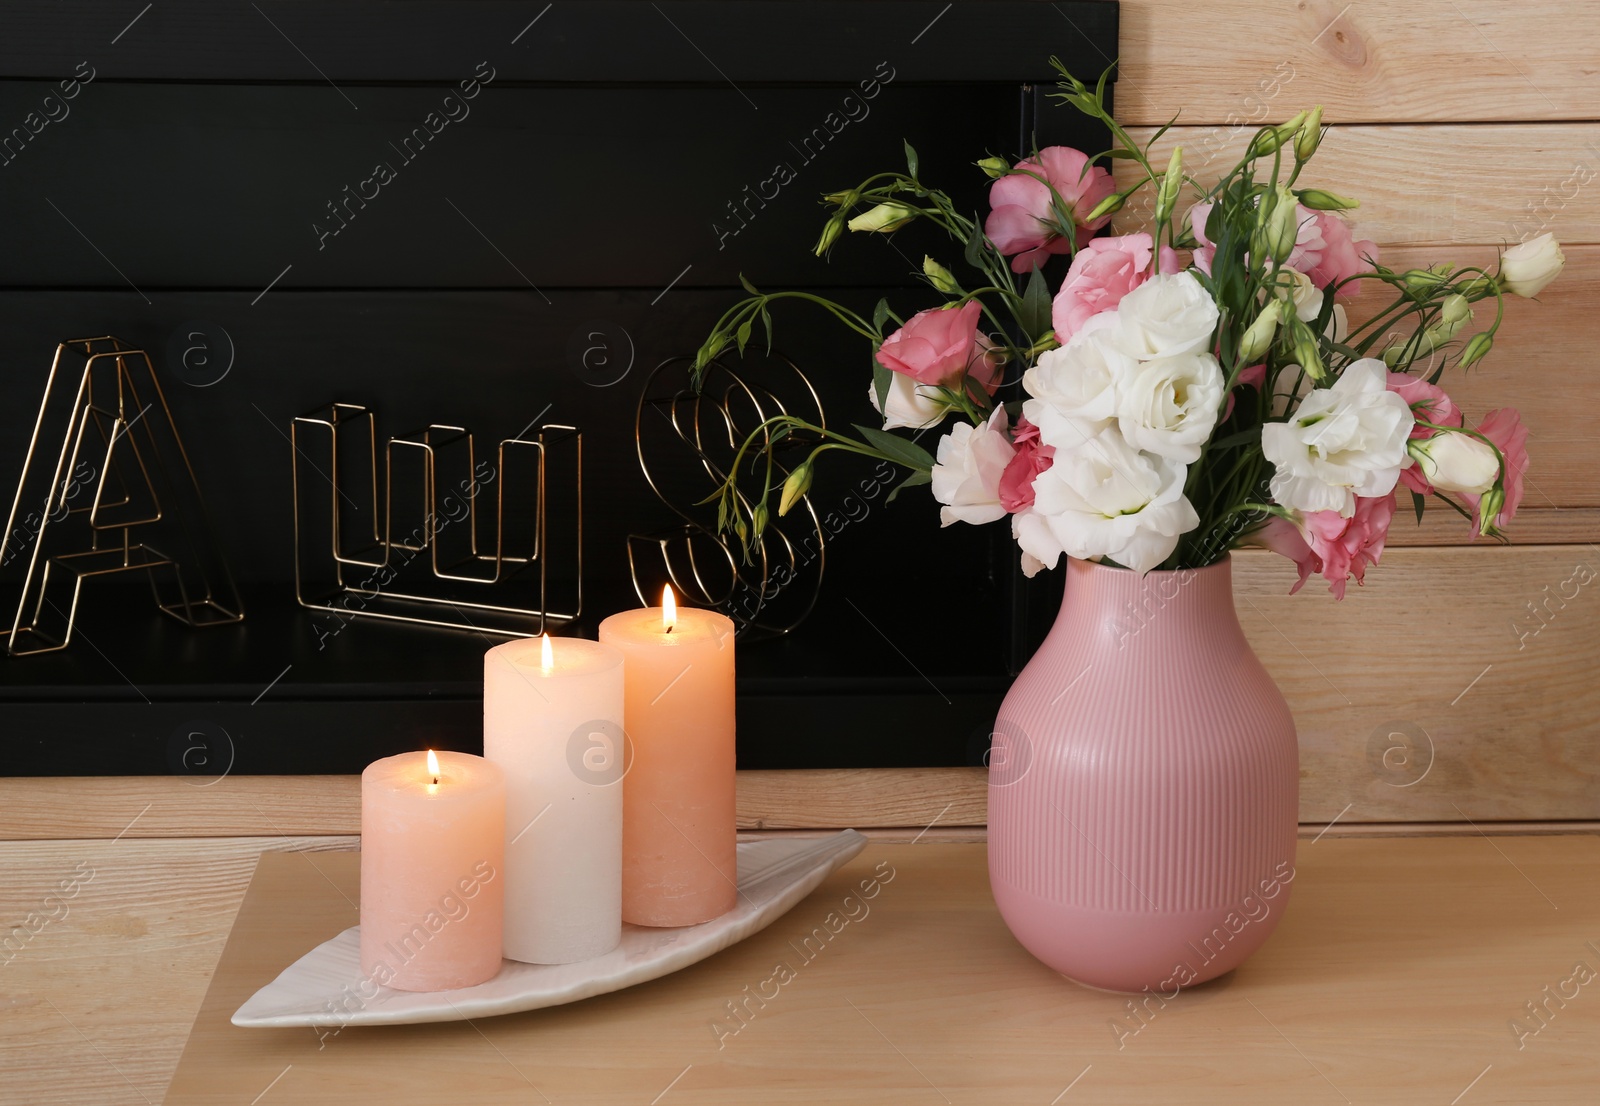 Photo of Burning candles and vase with flowers on table against wooden wall